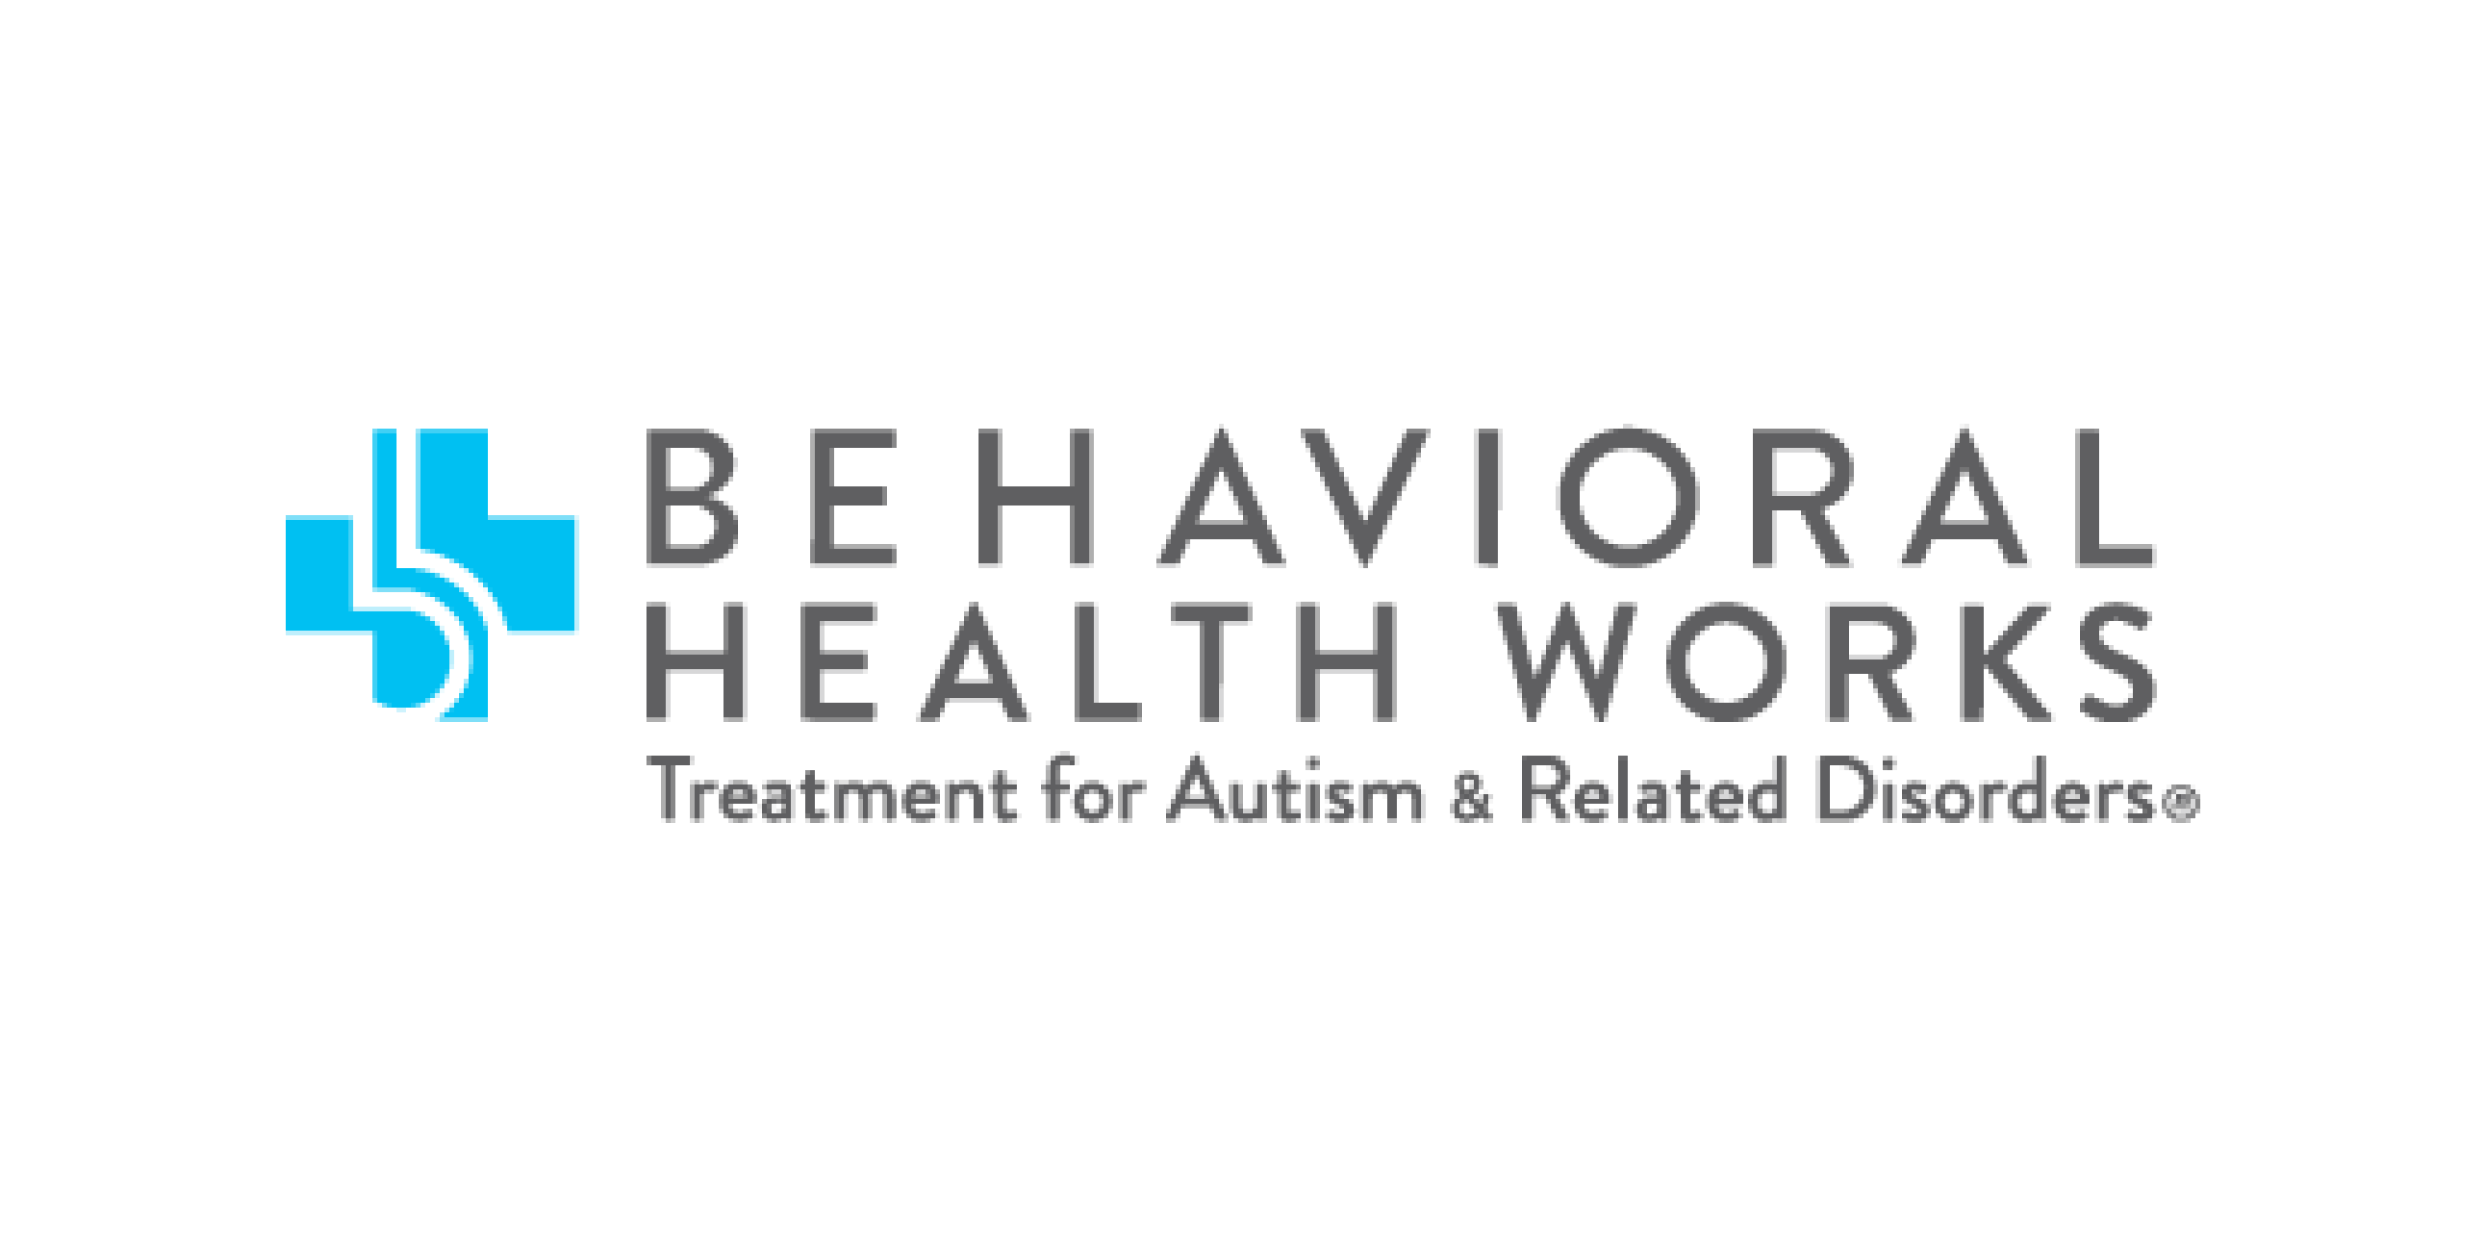 Behavioral Health Works  Treatment for Autism & Related Disorders